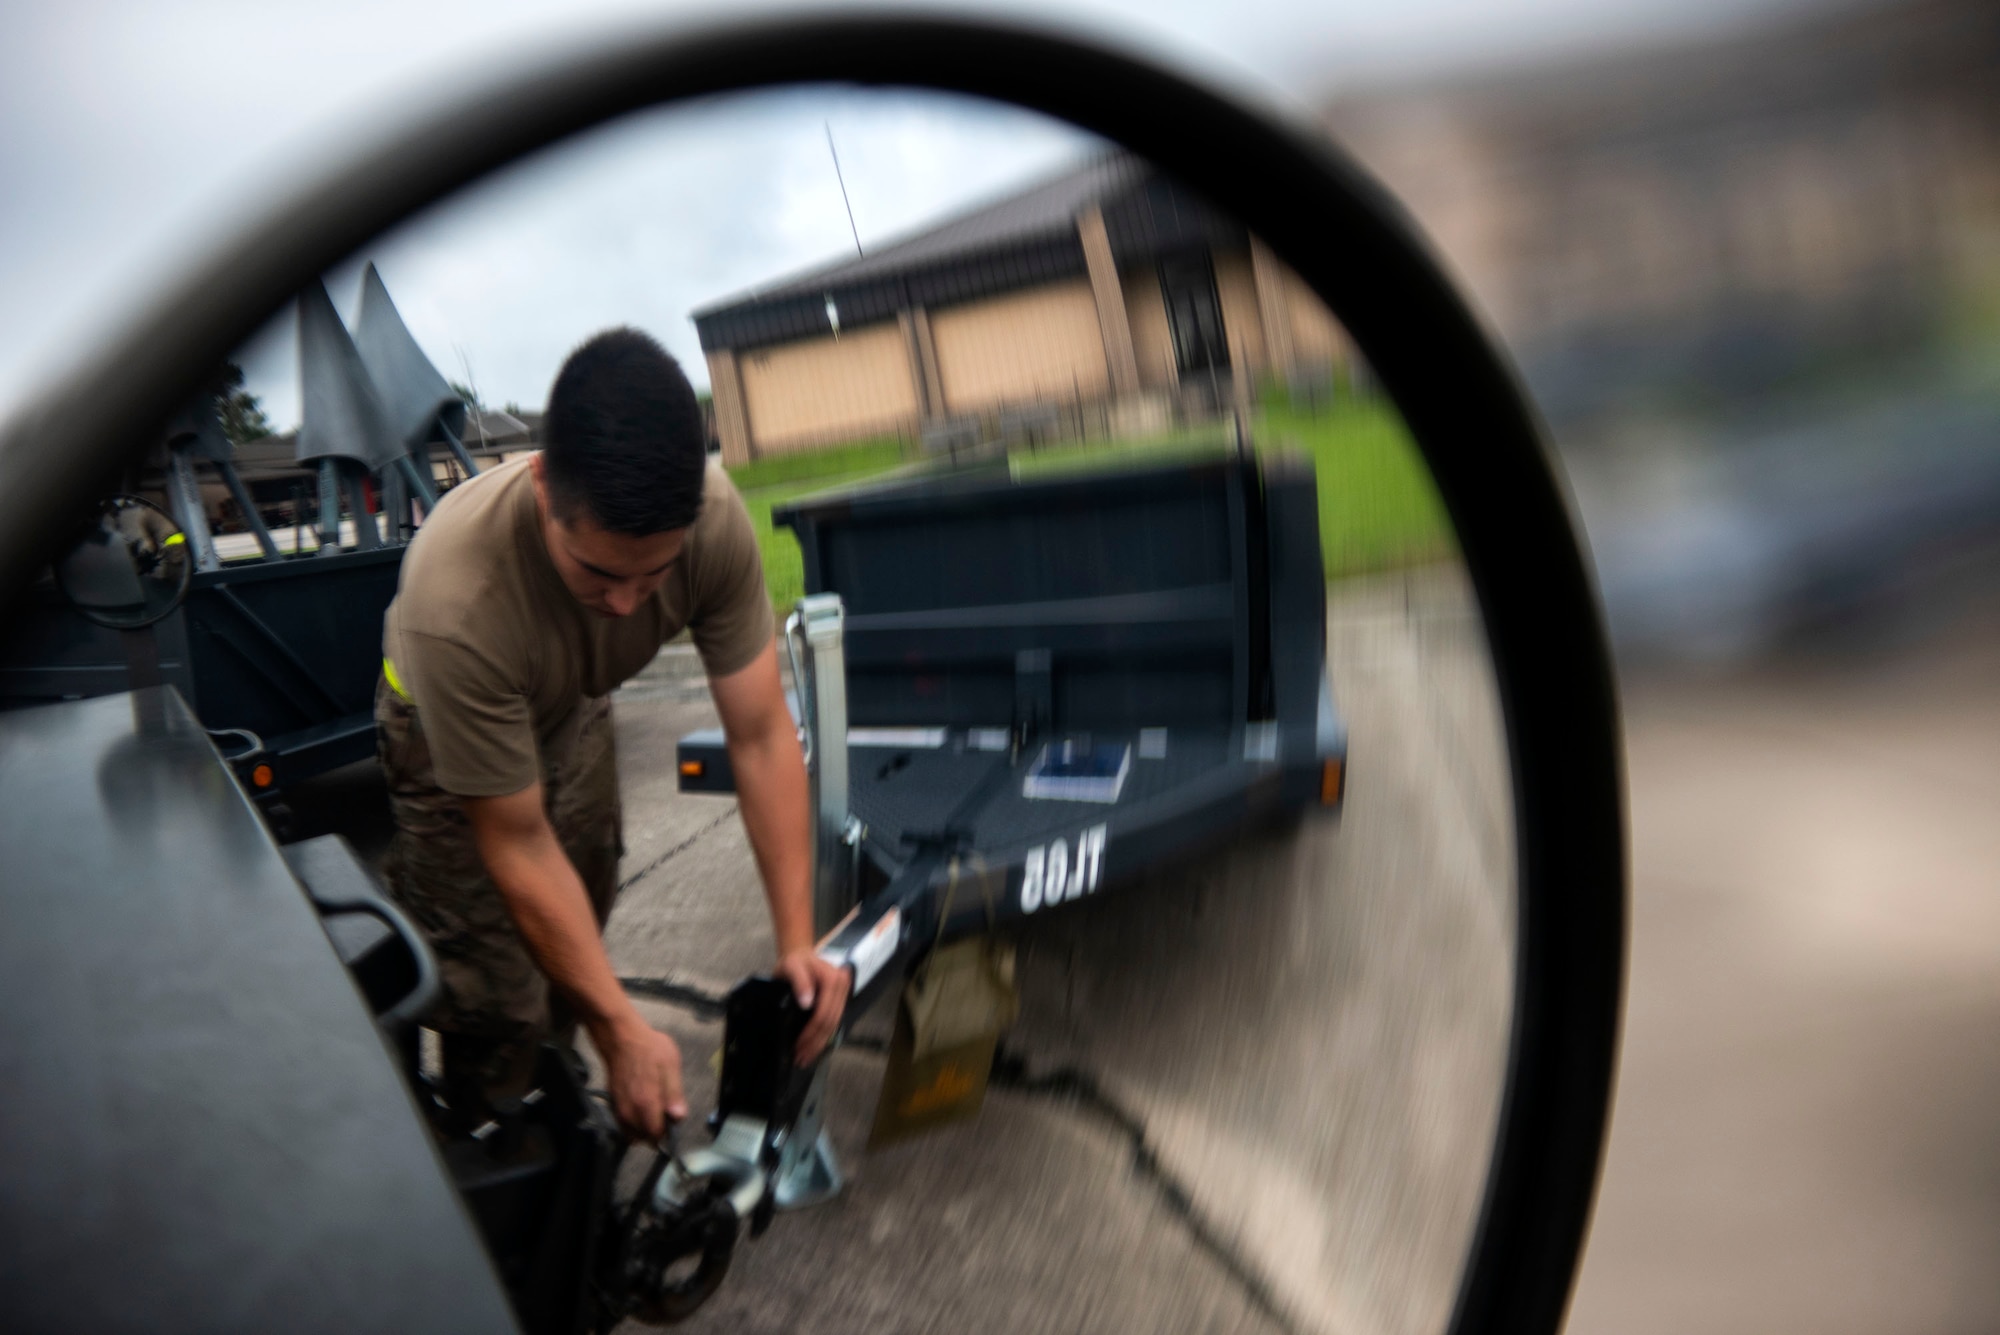 Senior Airman Brennan Hawk, 23d Maintenance Squadron aerospace ground equipment (AGE) journeyman, unhooks a trailer during a dispatch, June 21, 2019, at Moody Air Force Base, Ga.  AGE maintains the equipment needed to repair the three airframes in the 23d Wing. To accomplish this, AGE is broken down into three main functions: inspections, maintenance and dispatch. The dispatch section supports the movement of approximately 500 pieces of equipment, from hydraulic-test stands to generators and from axel jacks to air conditioners. AGE accumulates more than 1,300 hours of dispatches per month. (U.S. Air Force photo by Senior Airman Erick Requadt)